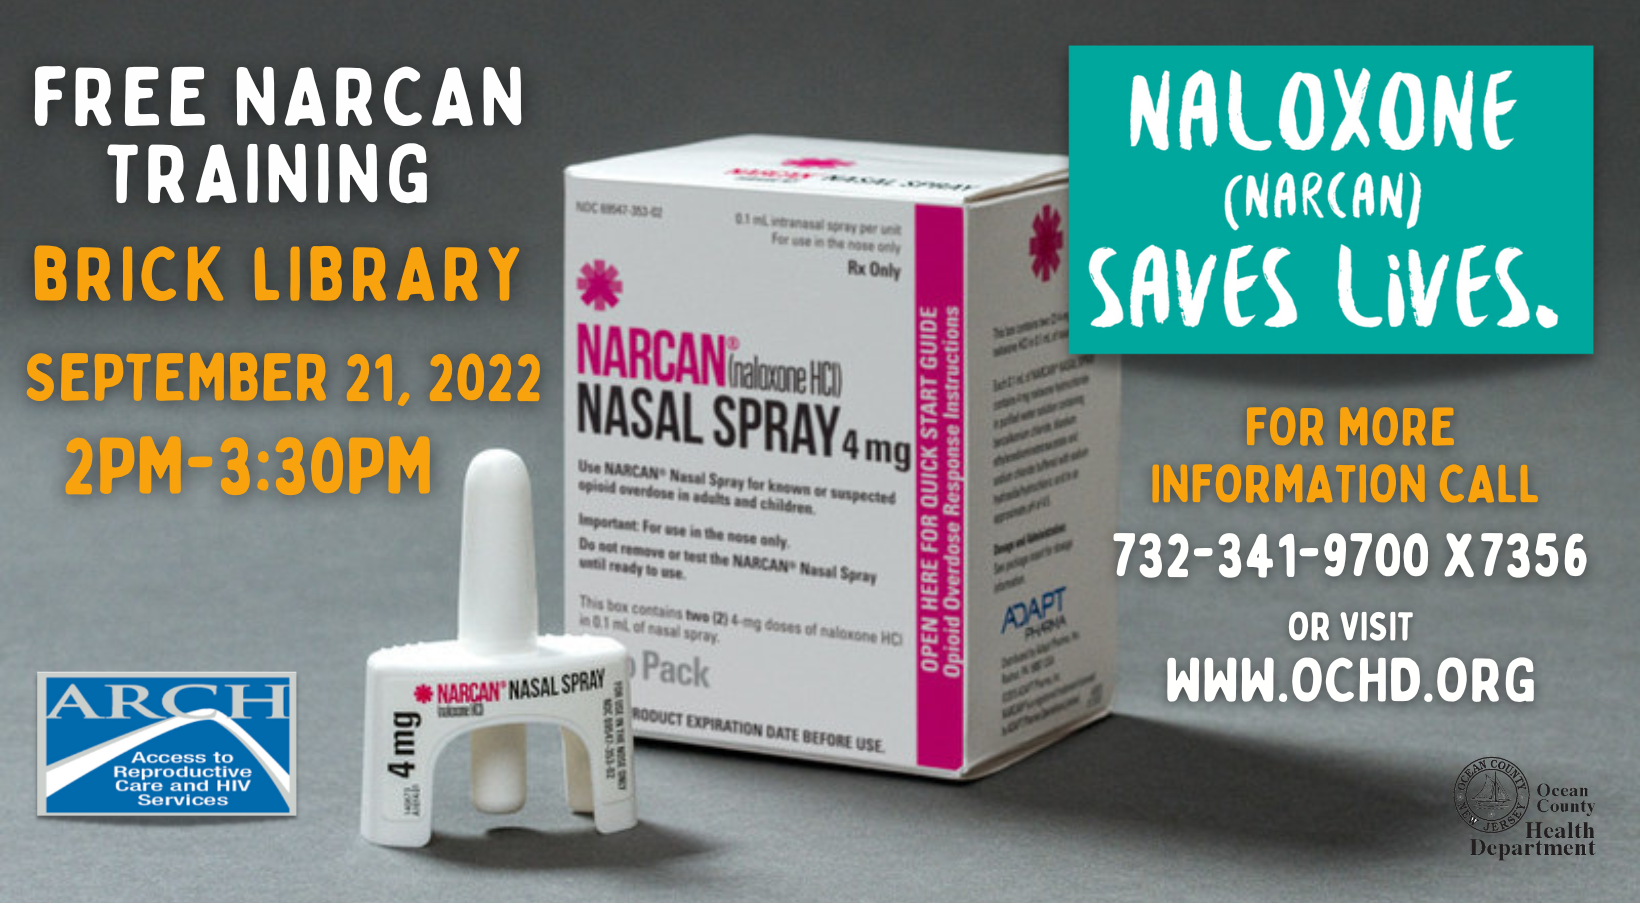 Training and distribution of Narcan at the library in Brick